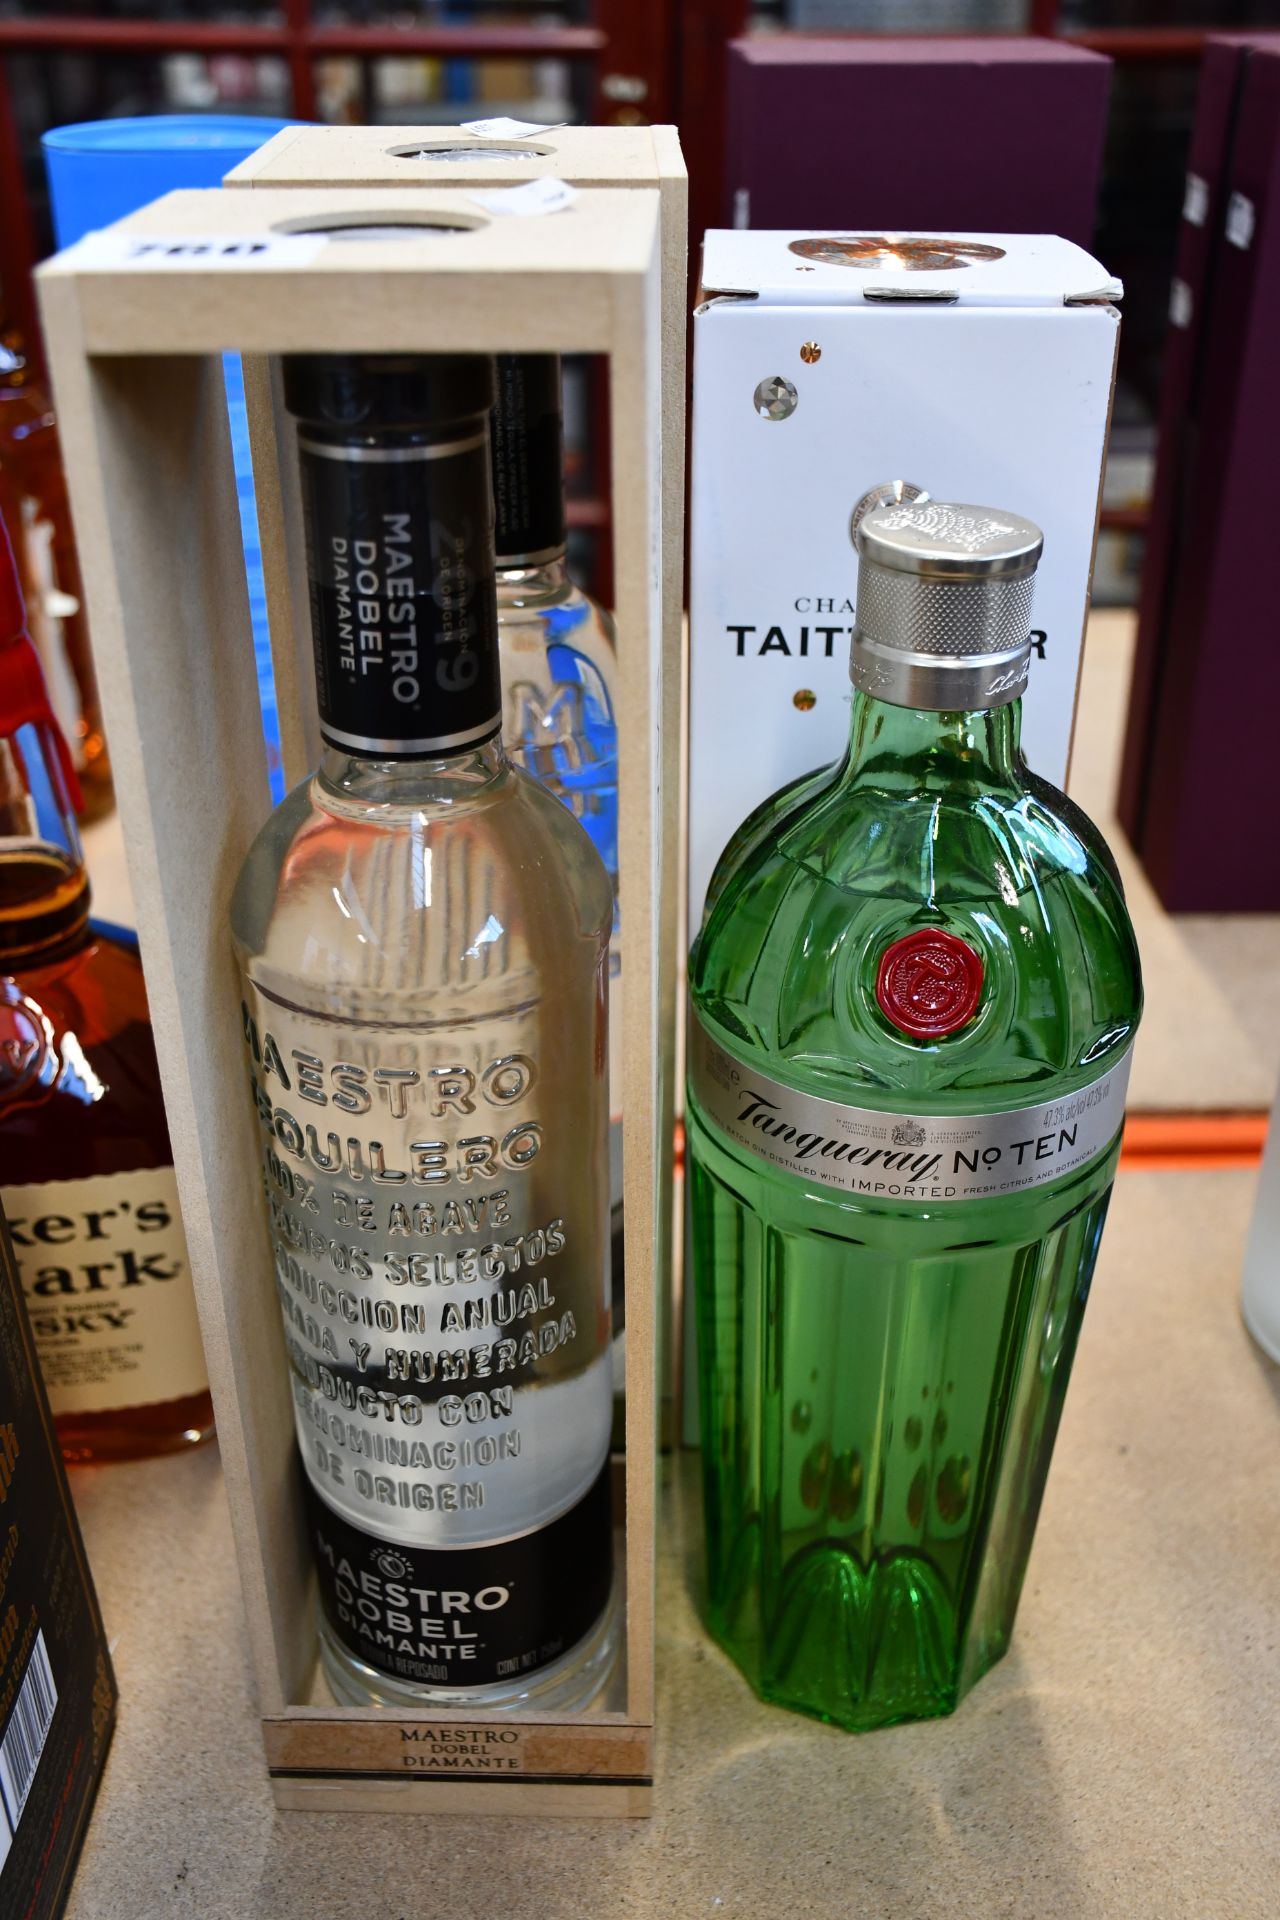 Two Maestro Dobel Diamante tequilas (2 x 750ml), Tanqueray No 10 gin (1ltr) and a Taittinger reserve